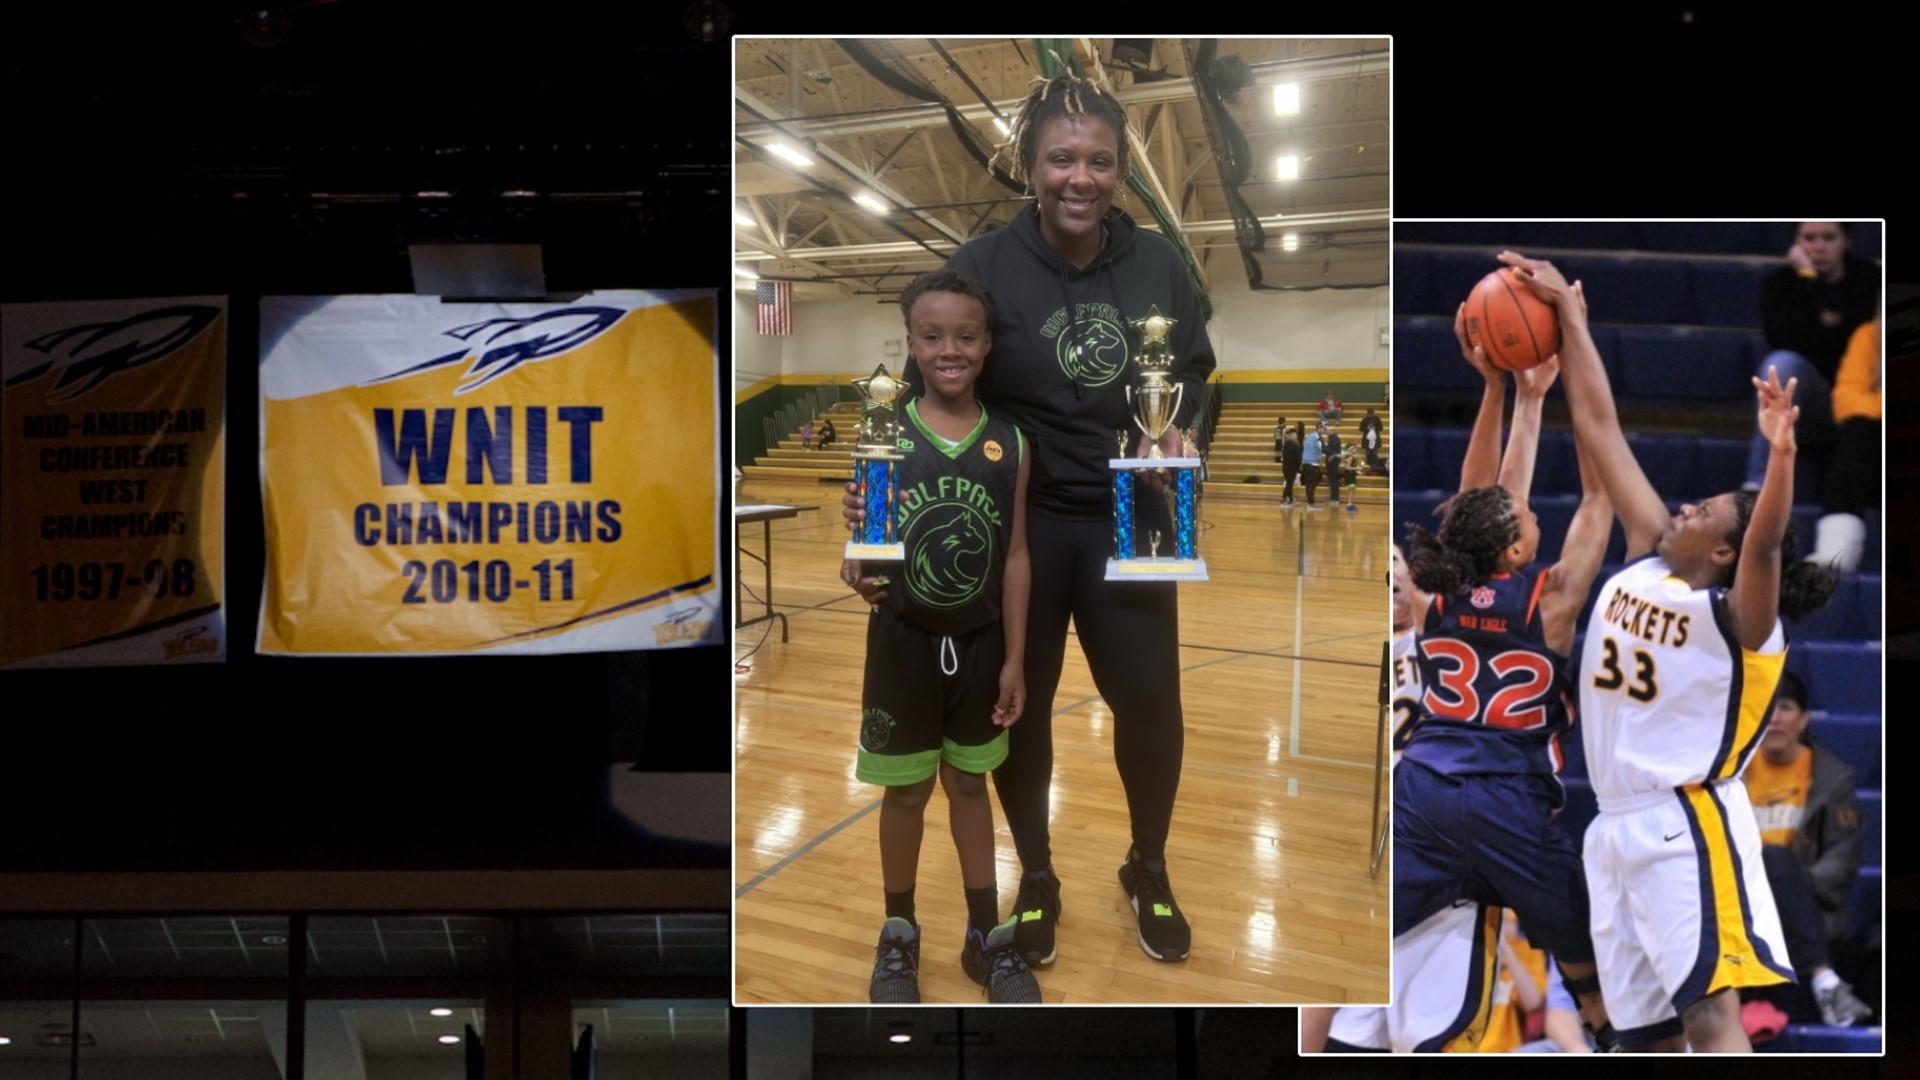 Yolanda Swain took her basketball career from Start High School to the University of Toledo. Today, she continues that journey for something bigger than herself.